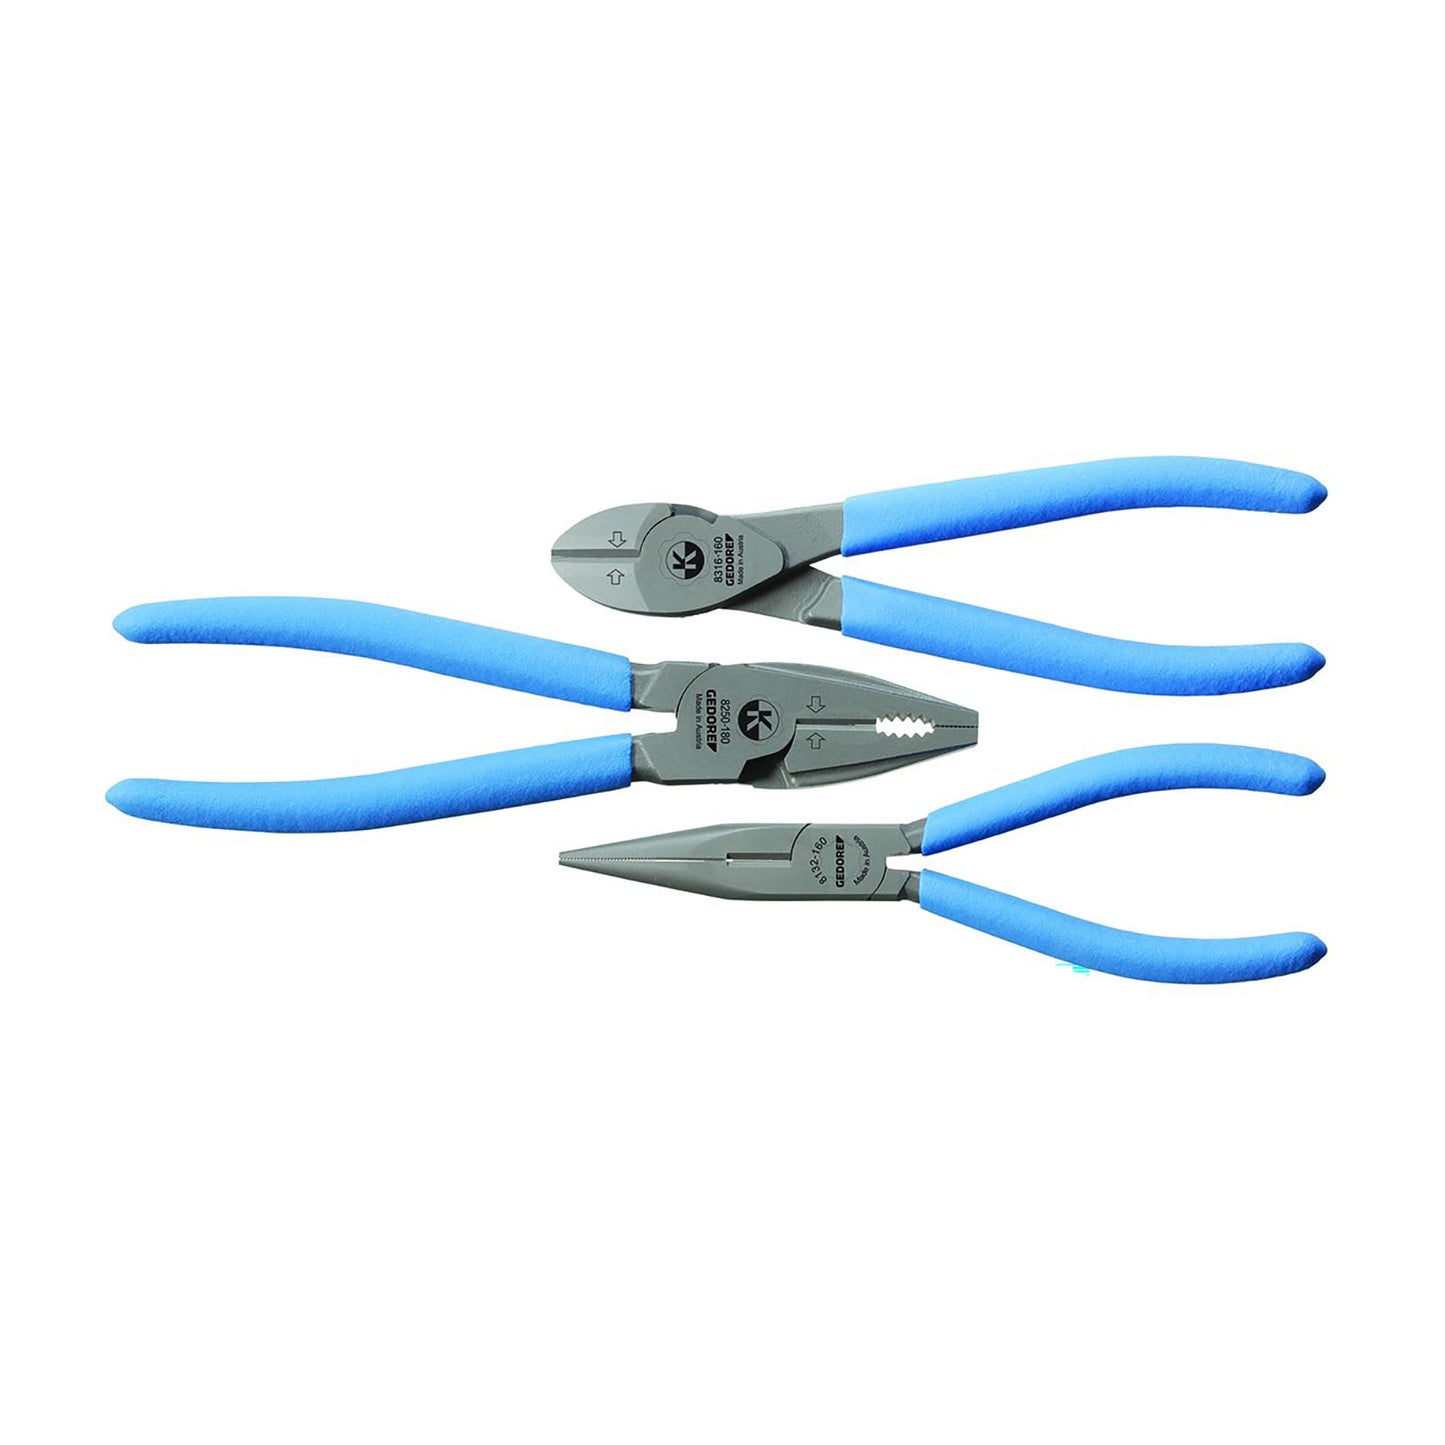 GEDORE S 8003 TL - Pliers Assortment, 3 Pieces (6755470)